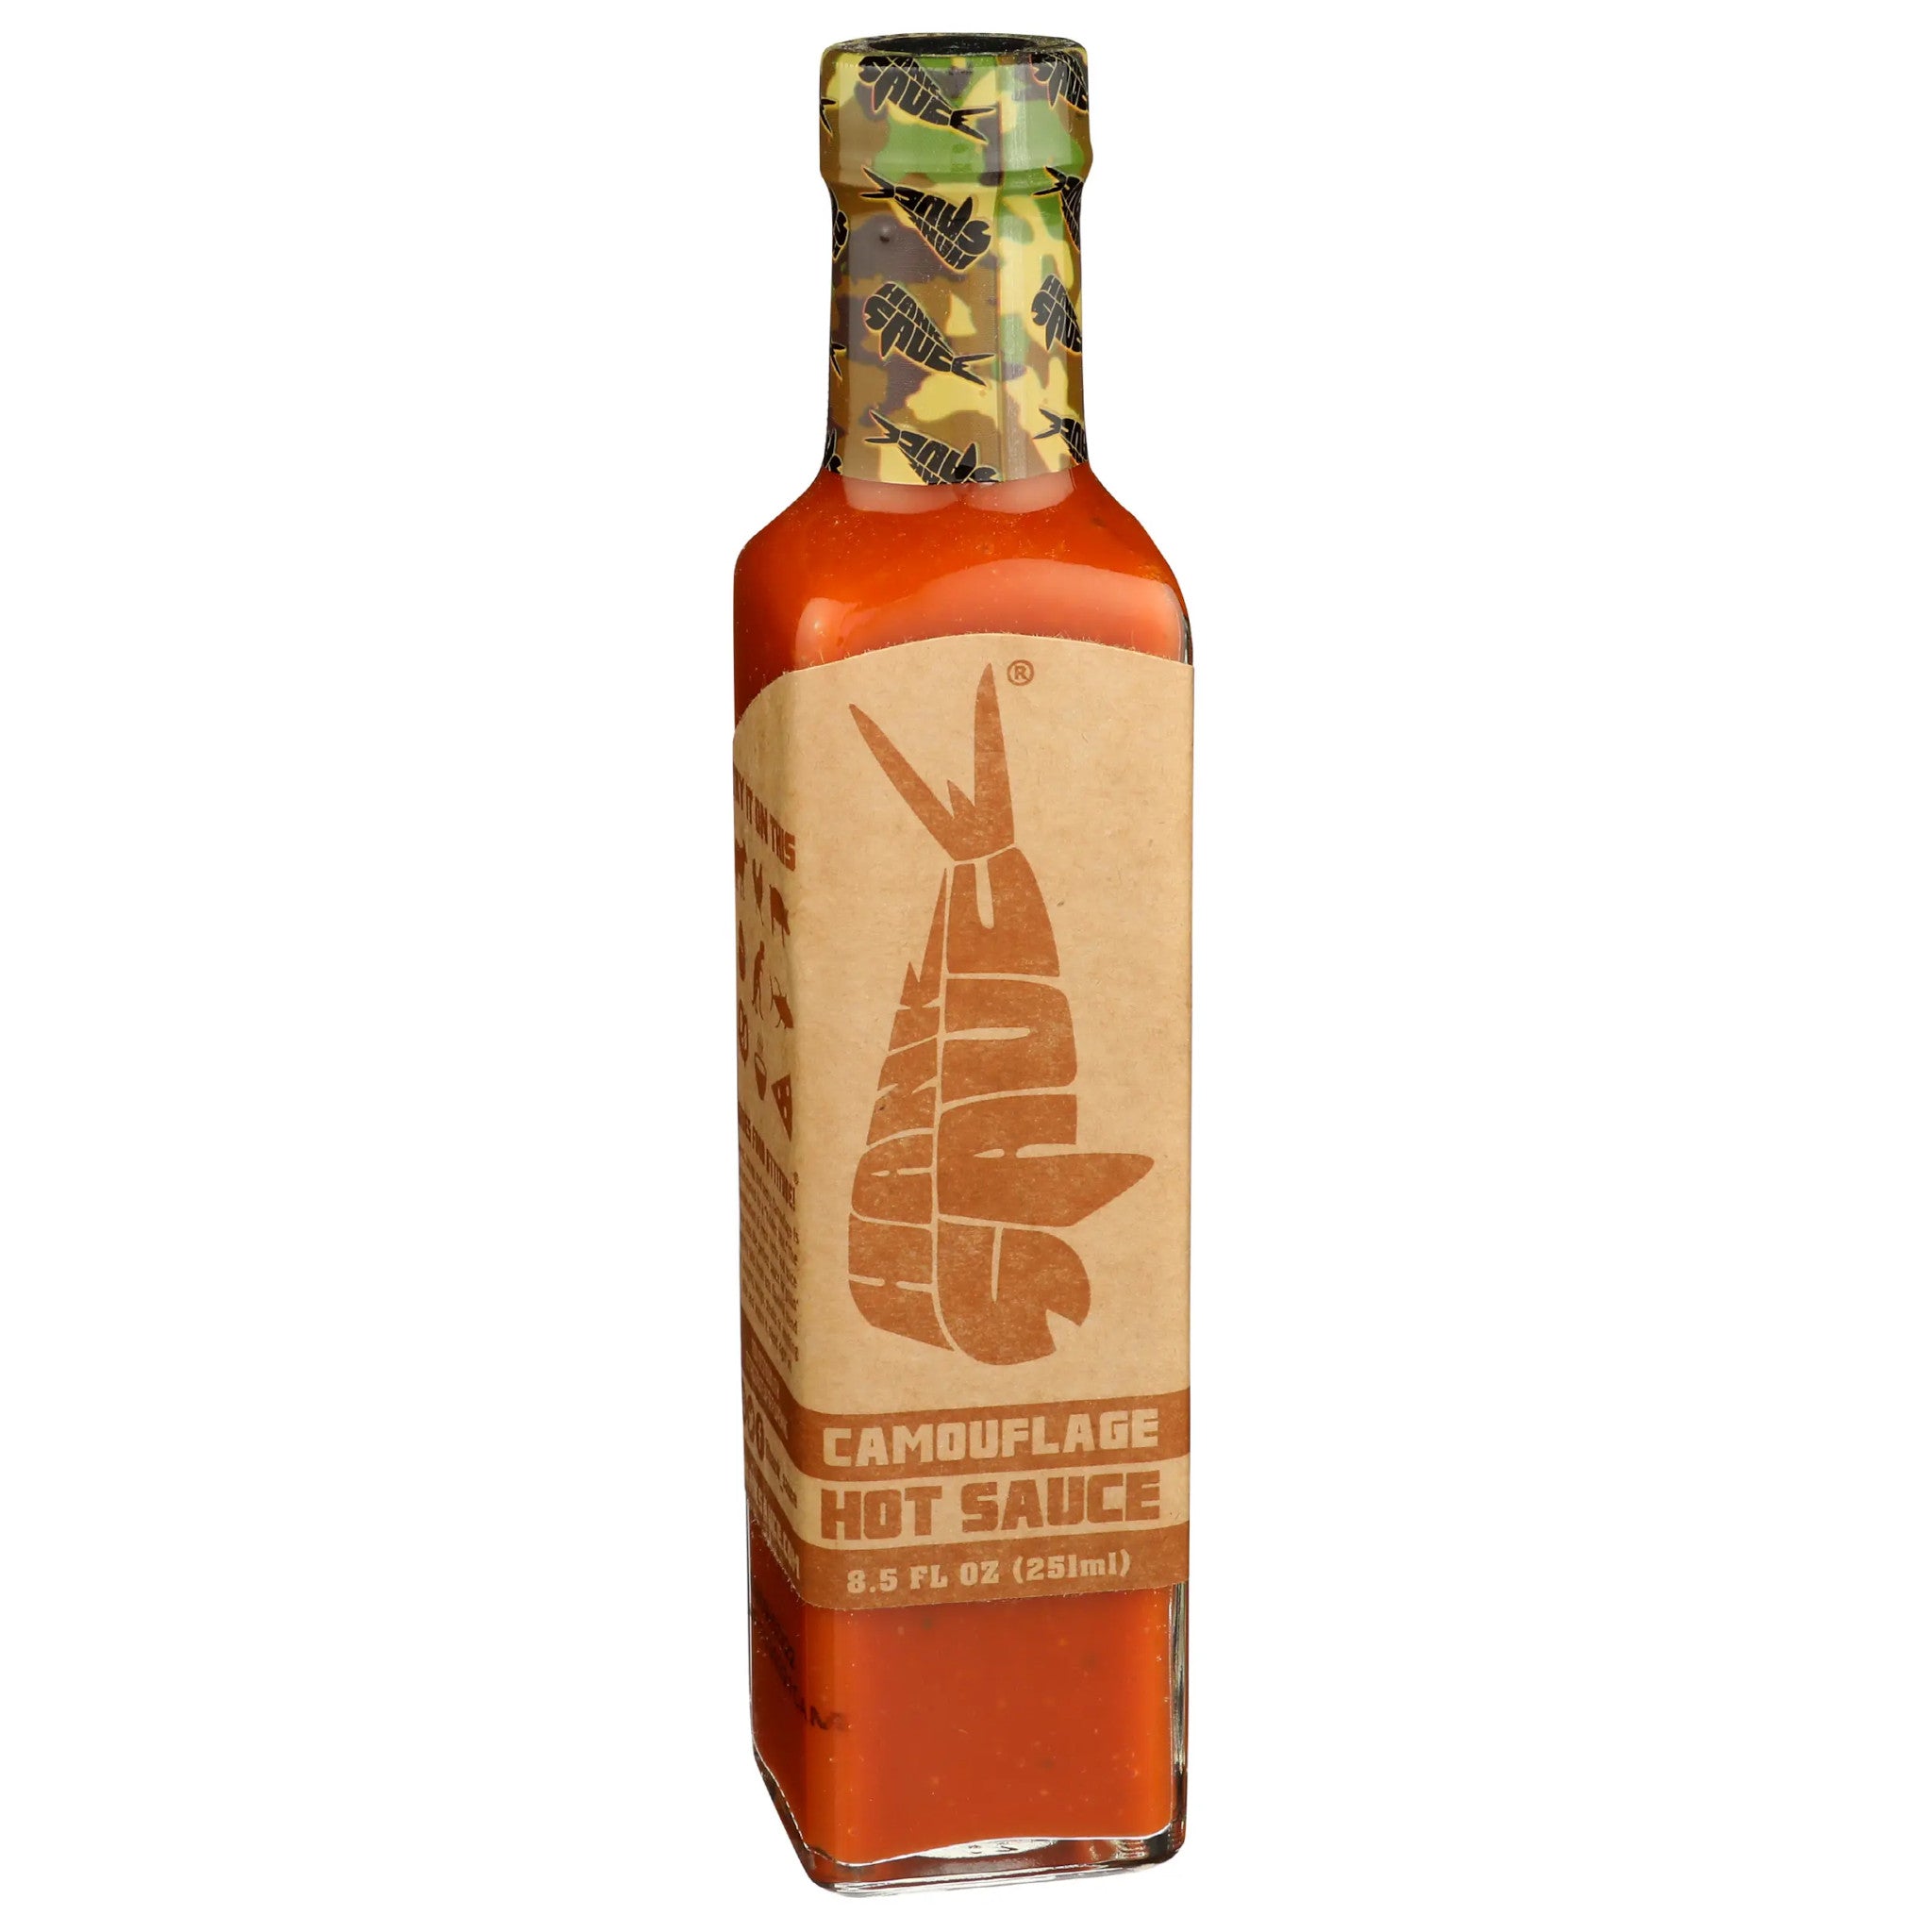 Camouflage Hot Sauce